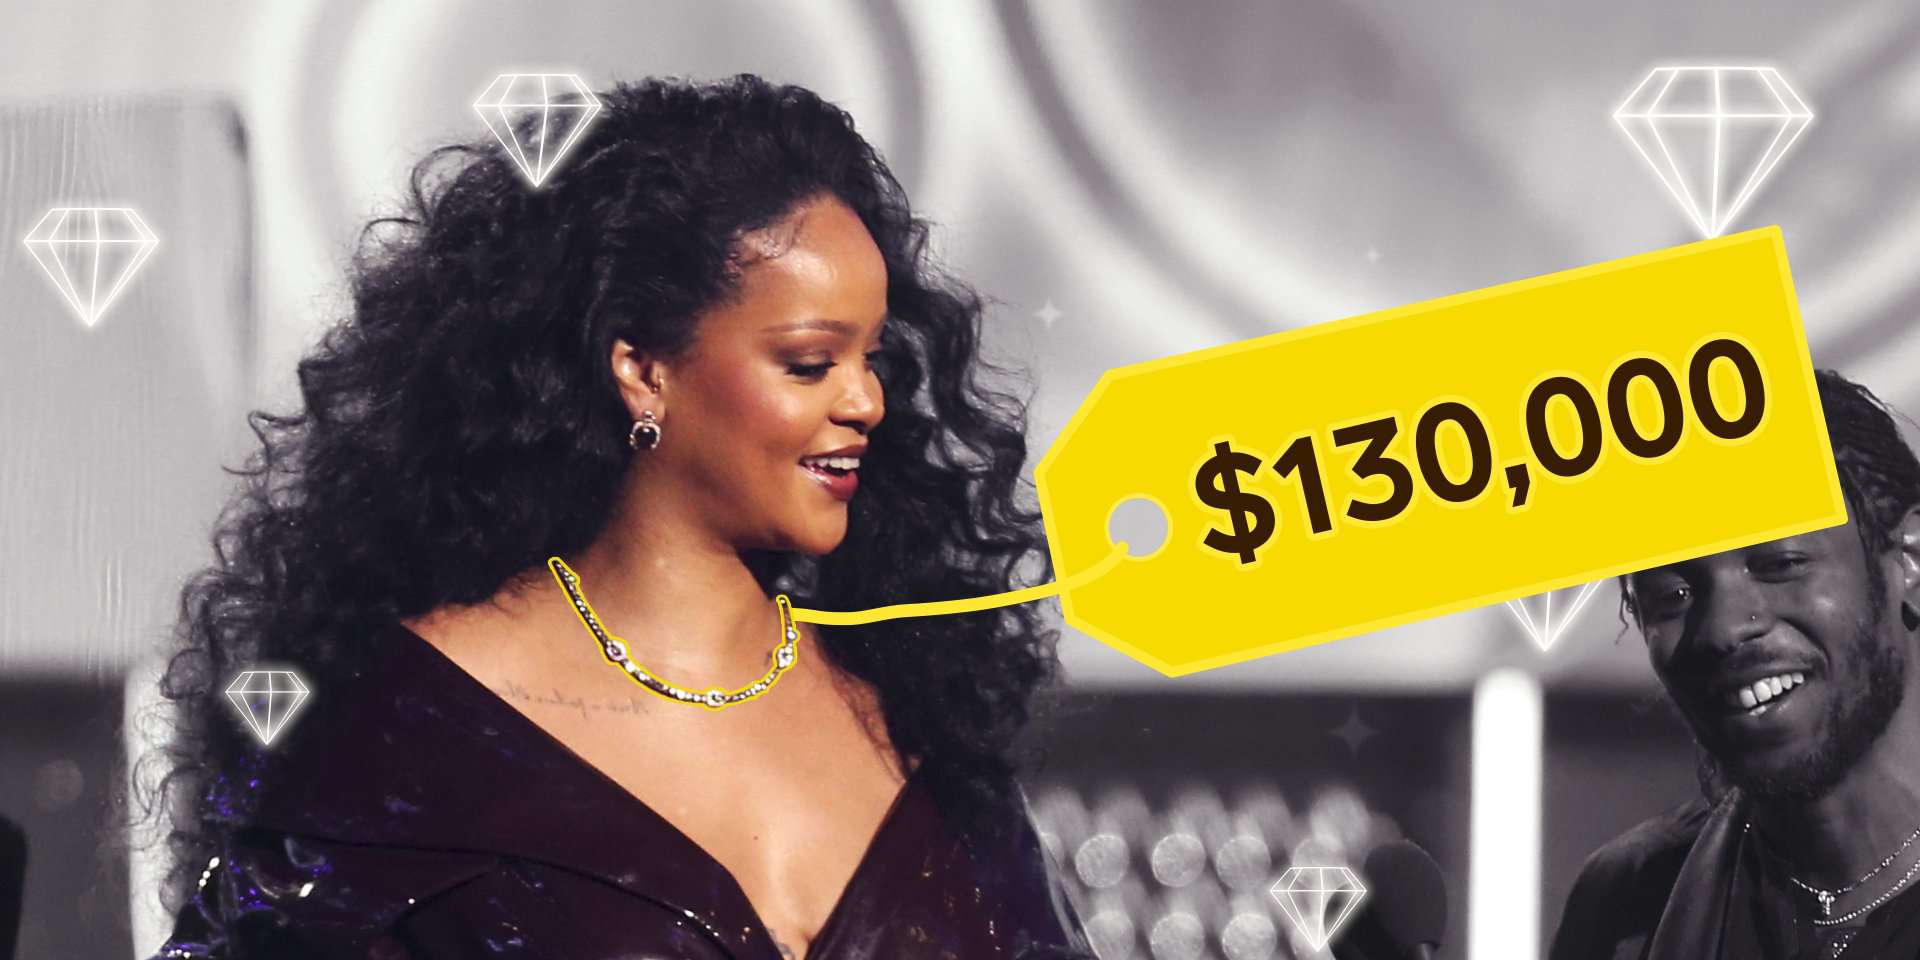 Taboola Ad Example 49500 - Here's How Chocolate Diamonds Went From Cheap Rocks To Adorning Rihanna's $130,000 Grammys Necklace